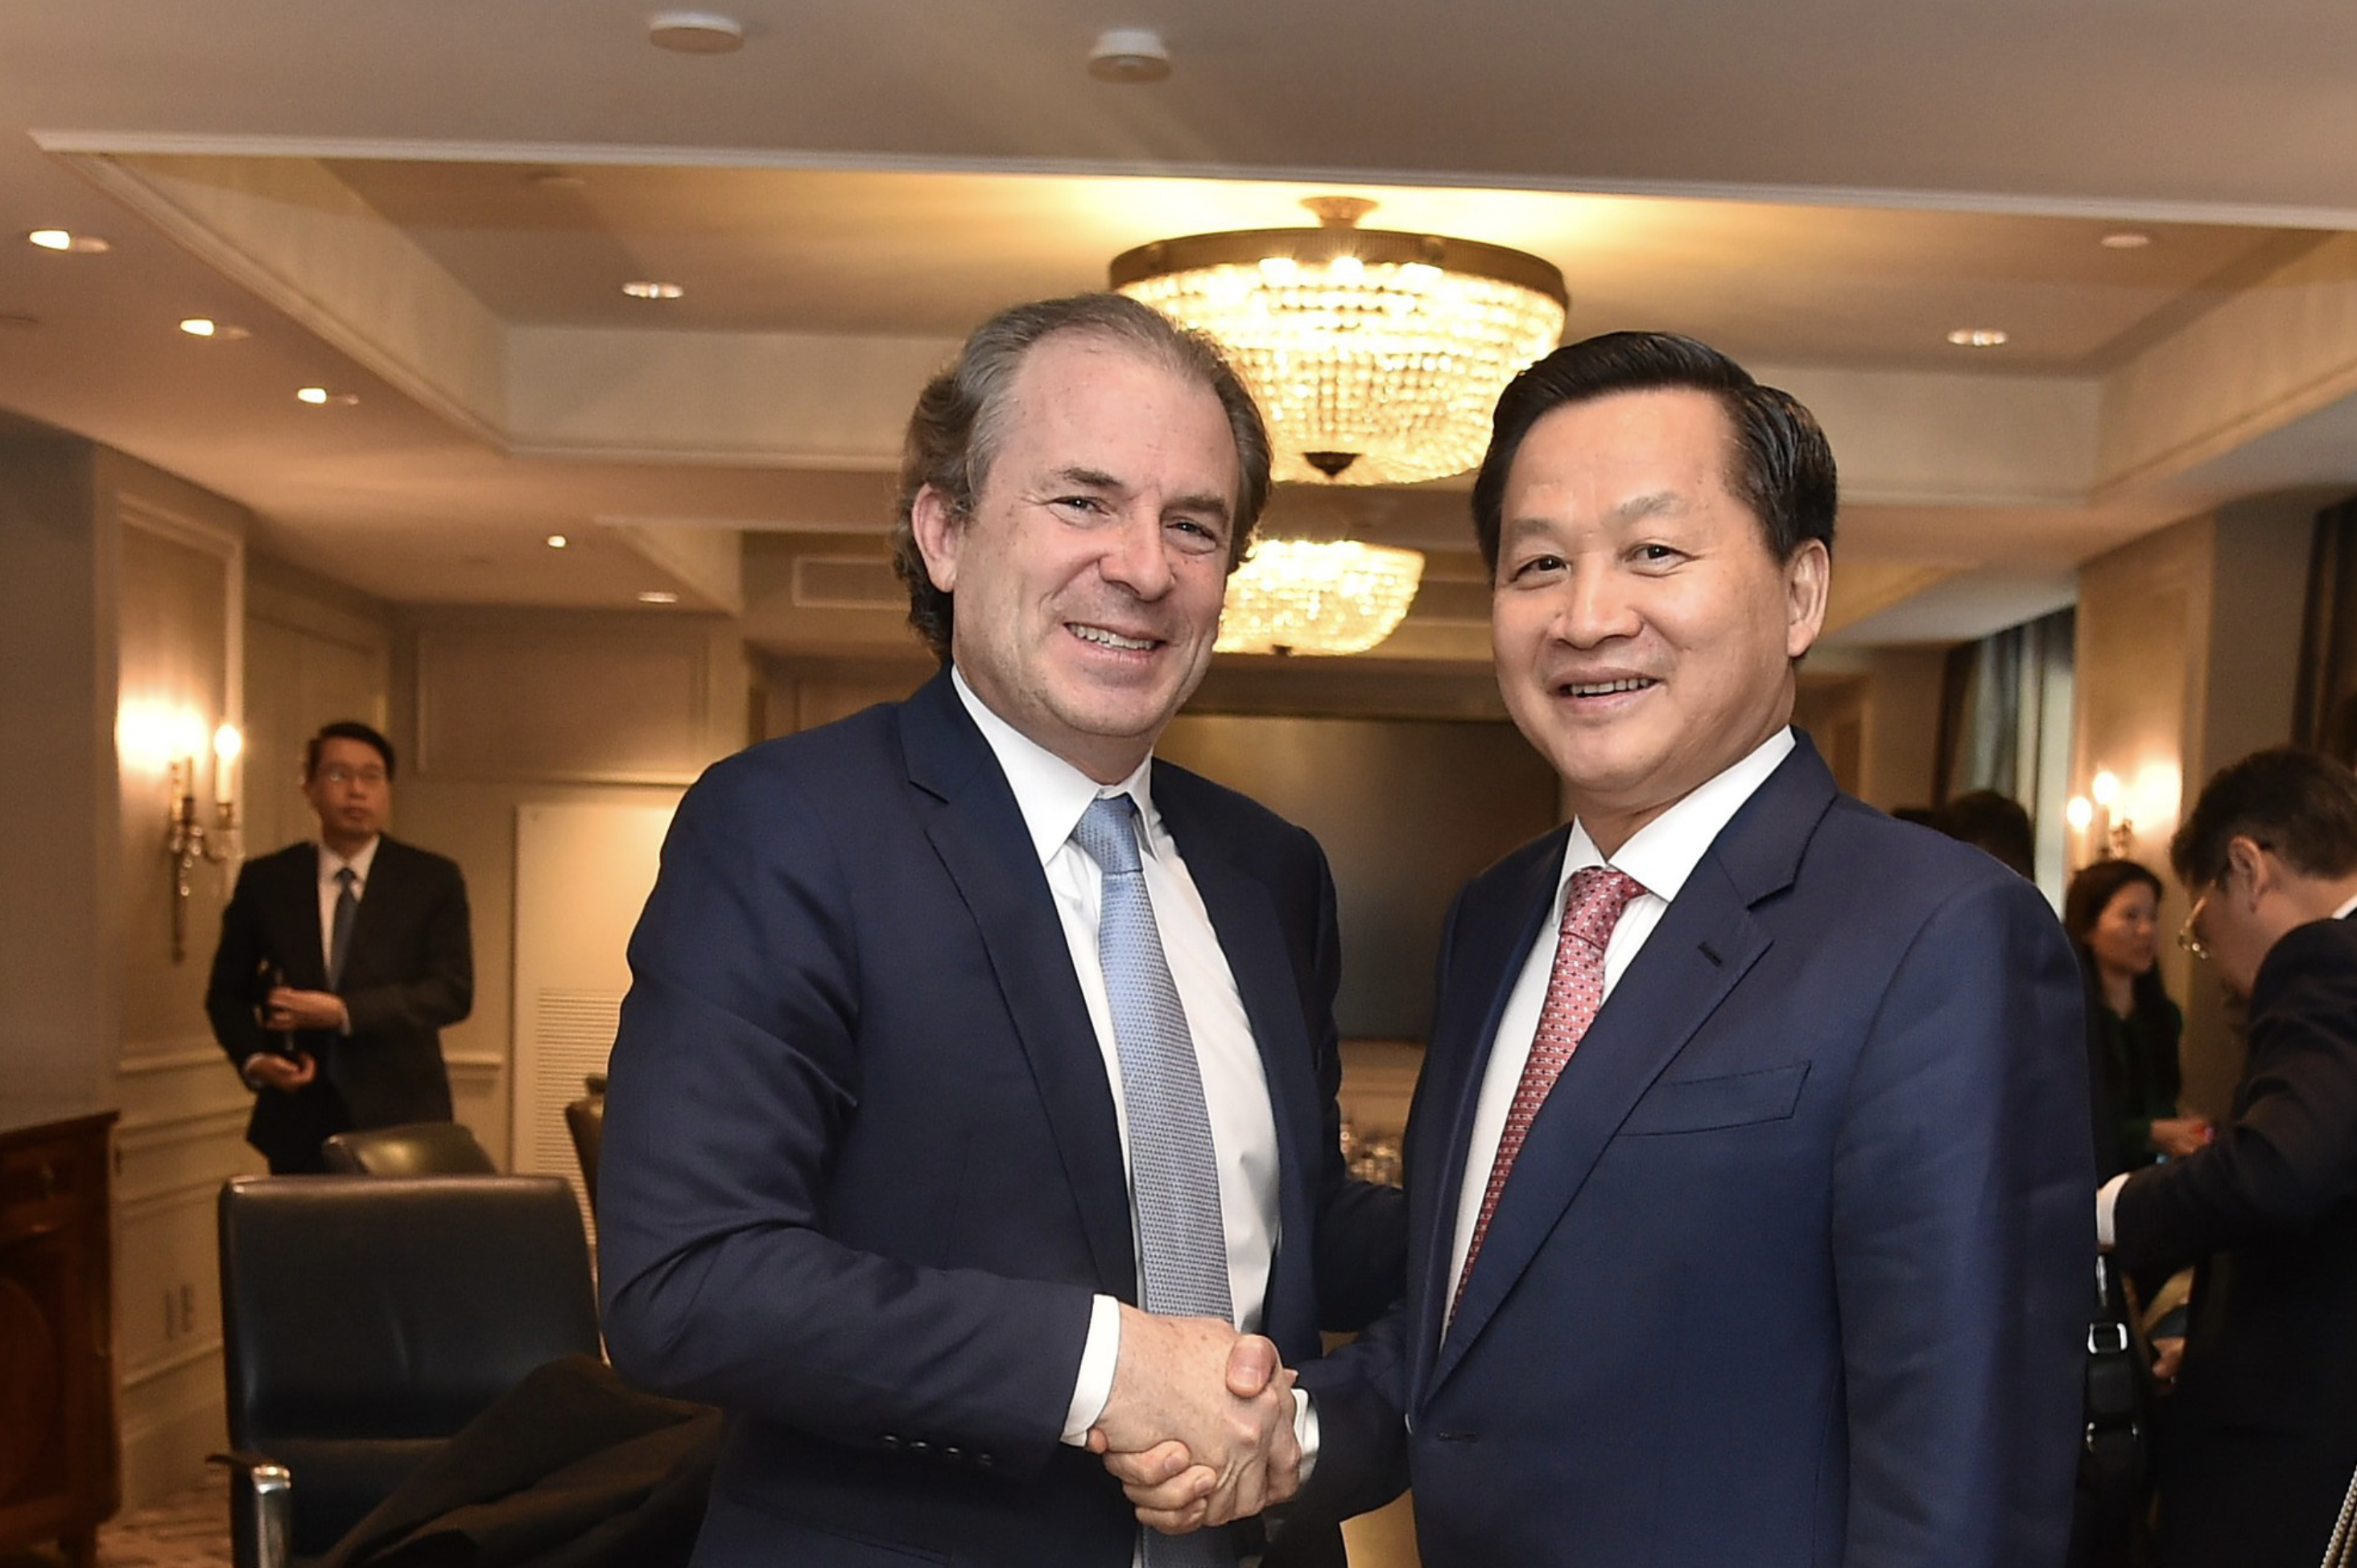 American firm eager to set up world-class entertainment complexes in Vietnam